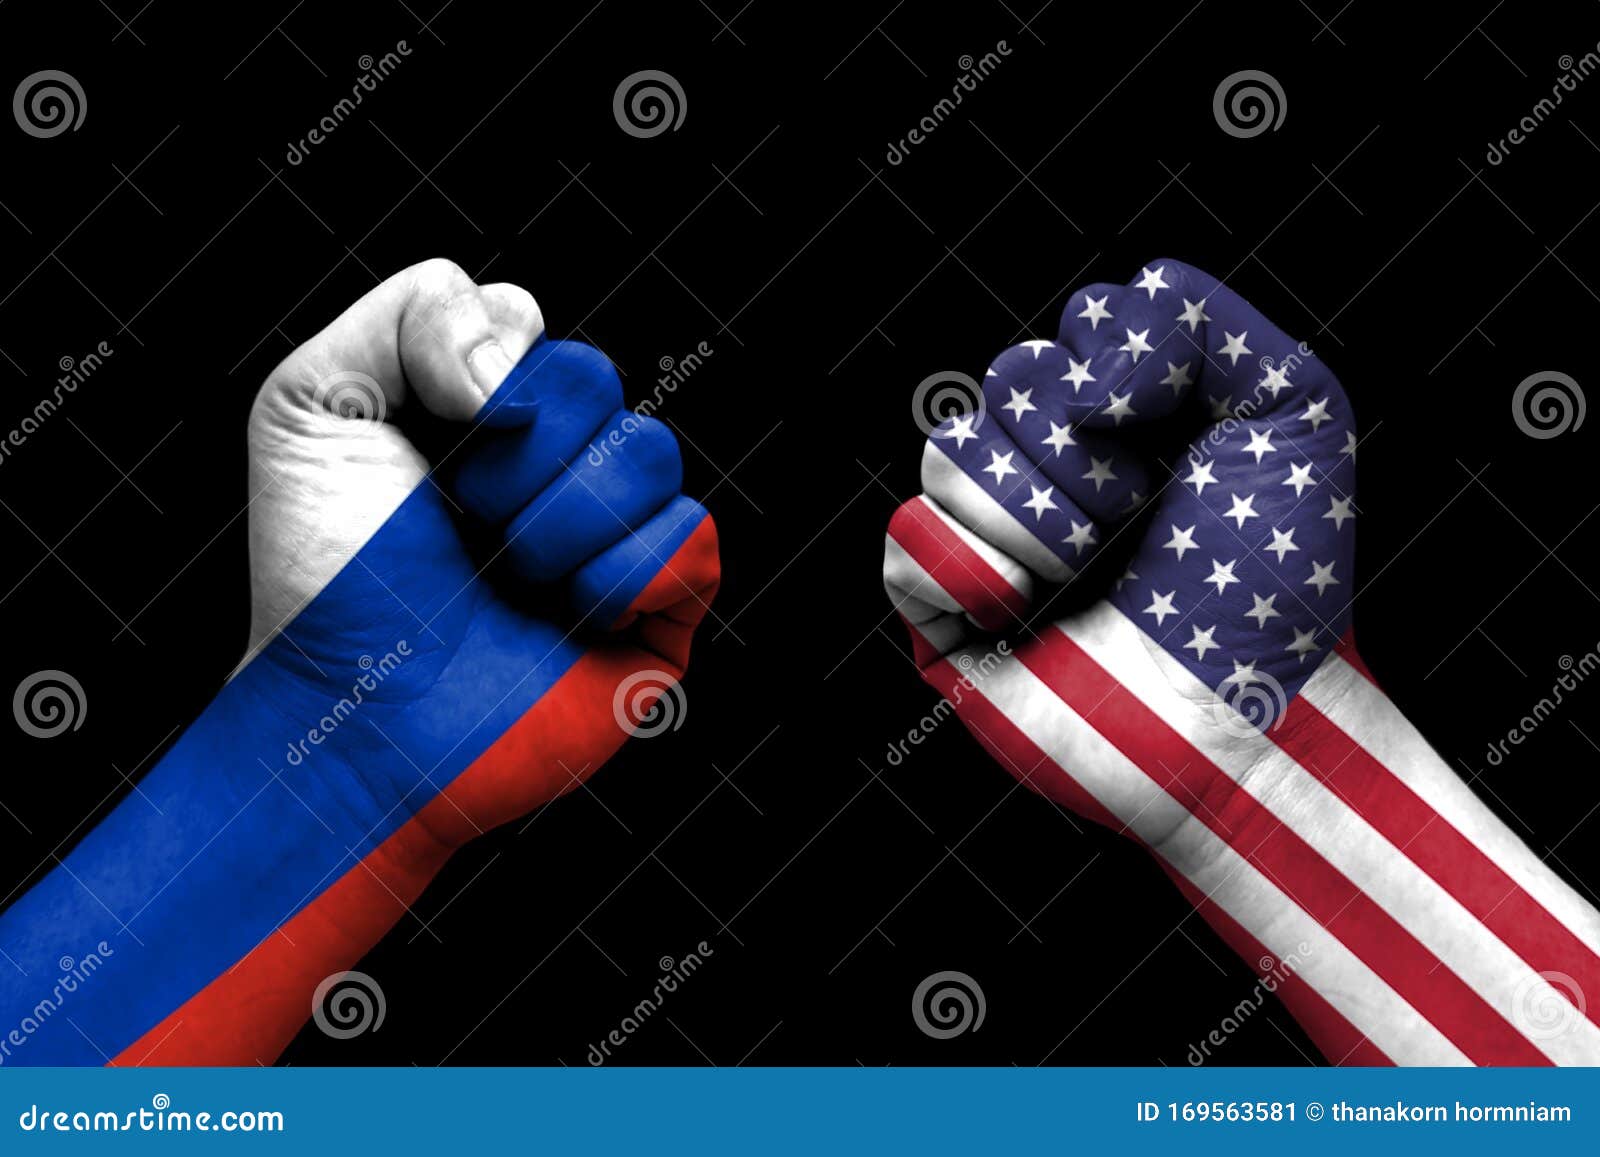 Russia And Usa Conflict International Relations Crisis Flag On Human